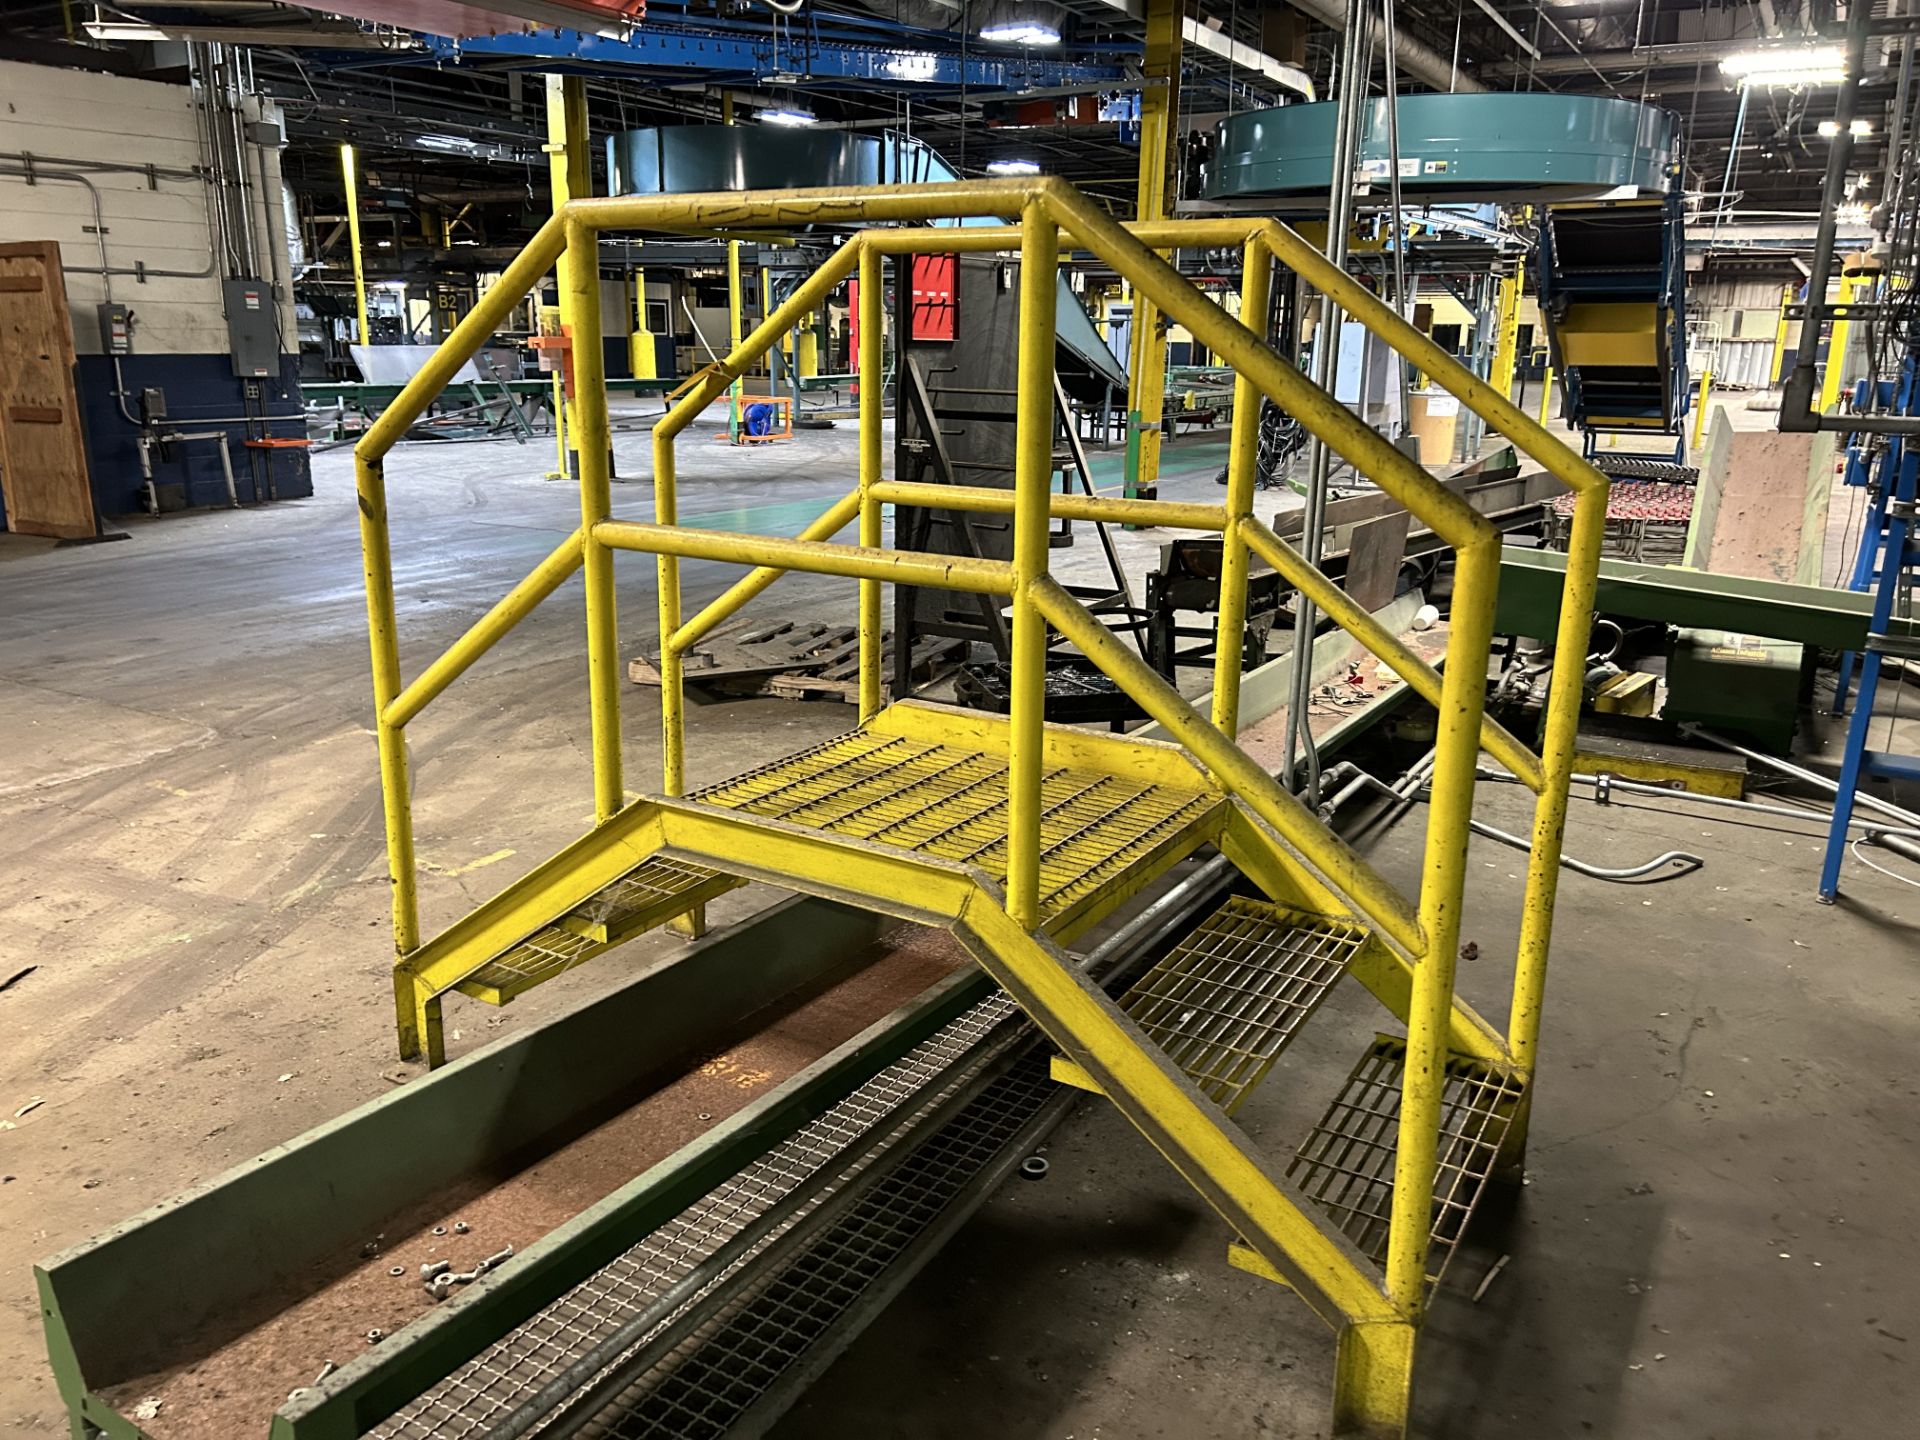 Crossover Steps, Rigging/ Removal Fee - $125 - Image 2 of 3